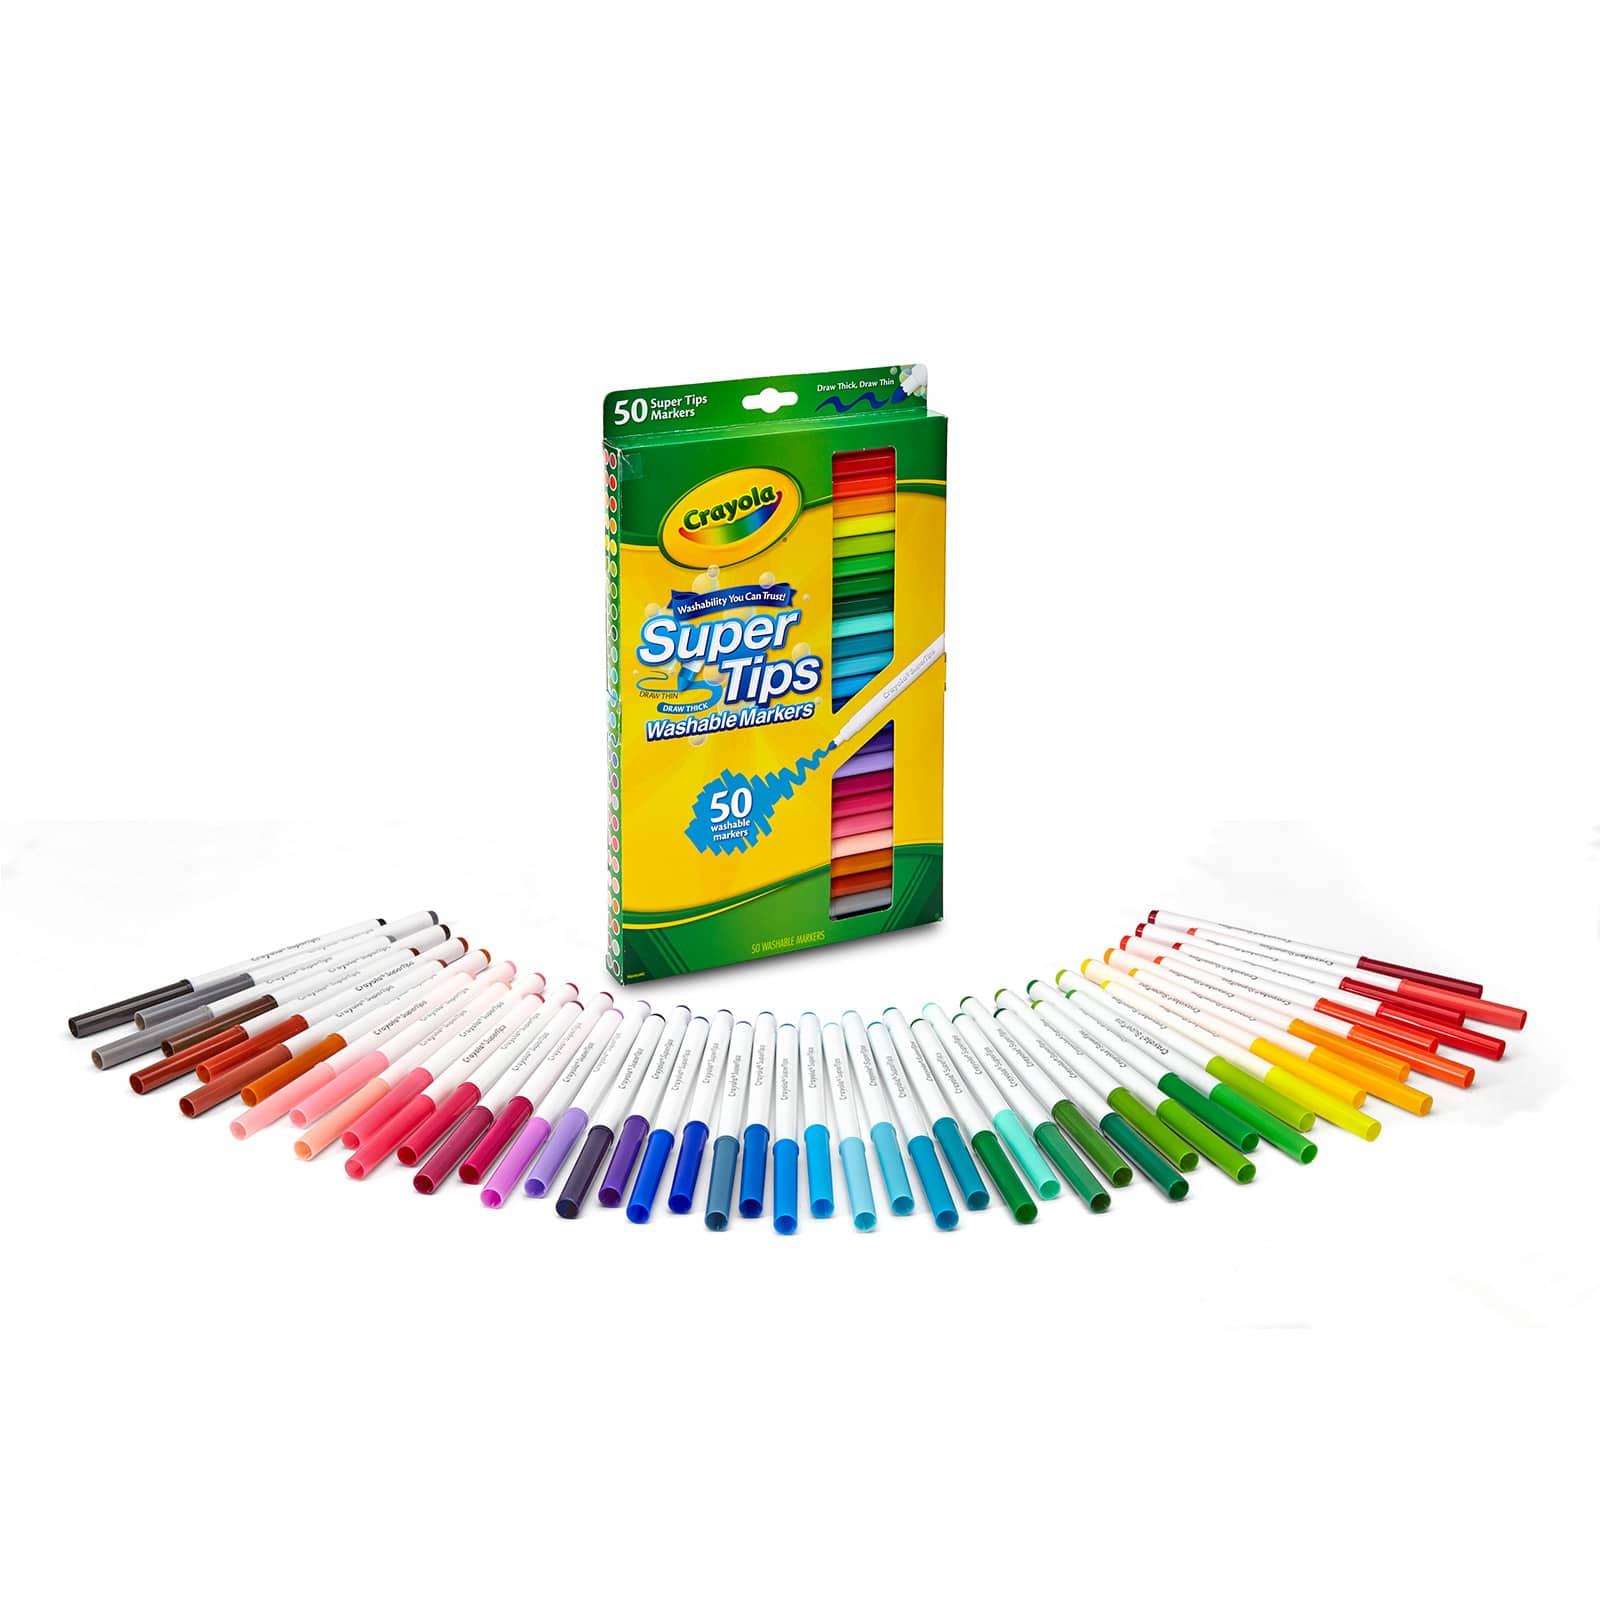 Black Crayola Washable Markers - Search Shopping